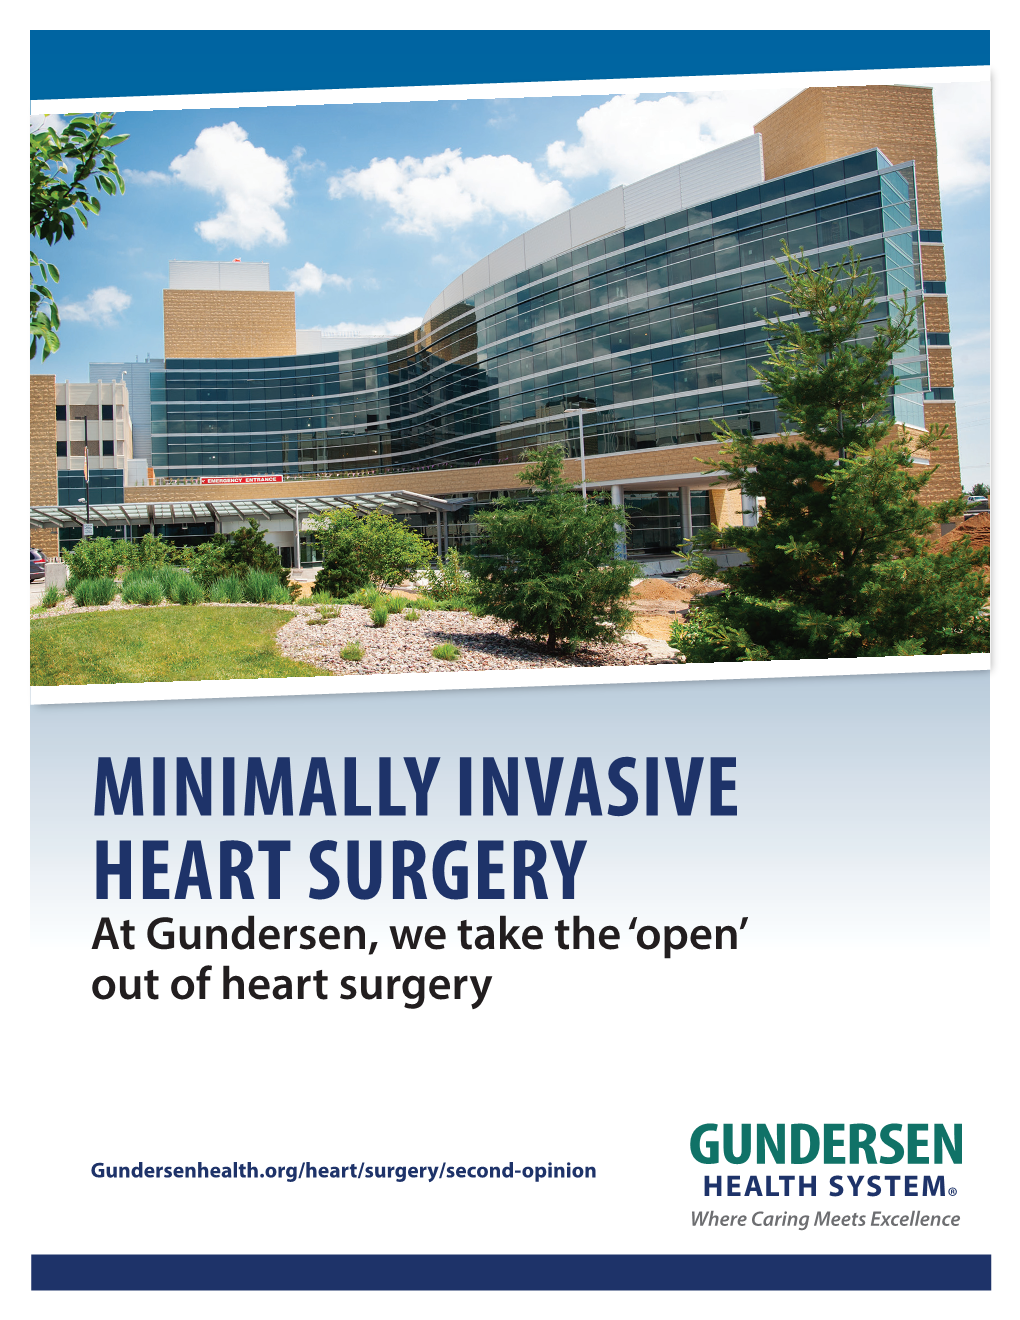 MINIMALLY INVASIVE HEART SURGERY at Gundersen, We Take the ‘Open’ out of Heart Surgery